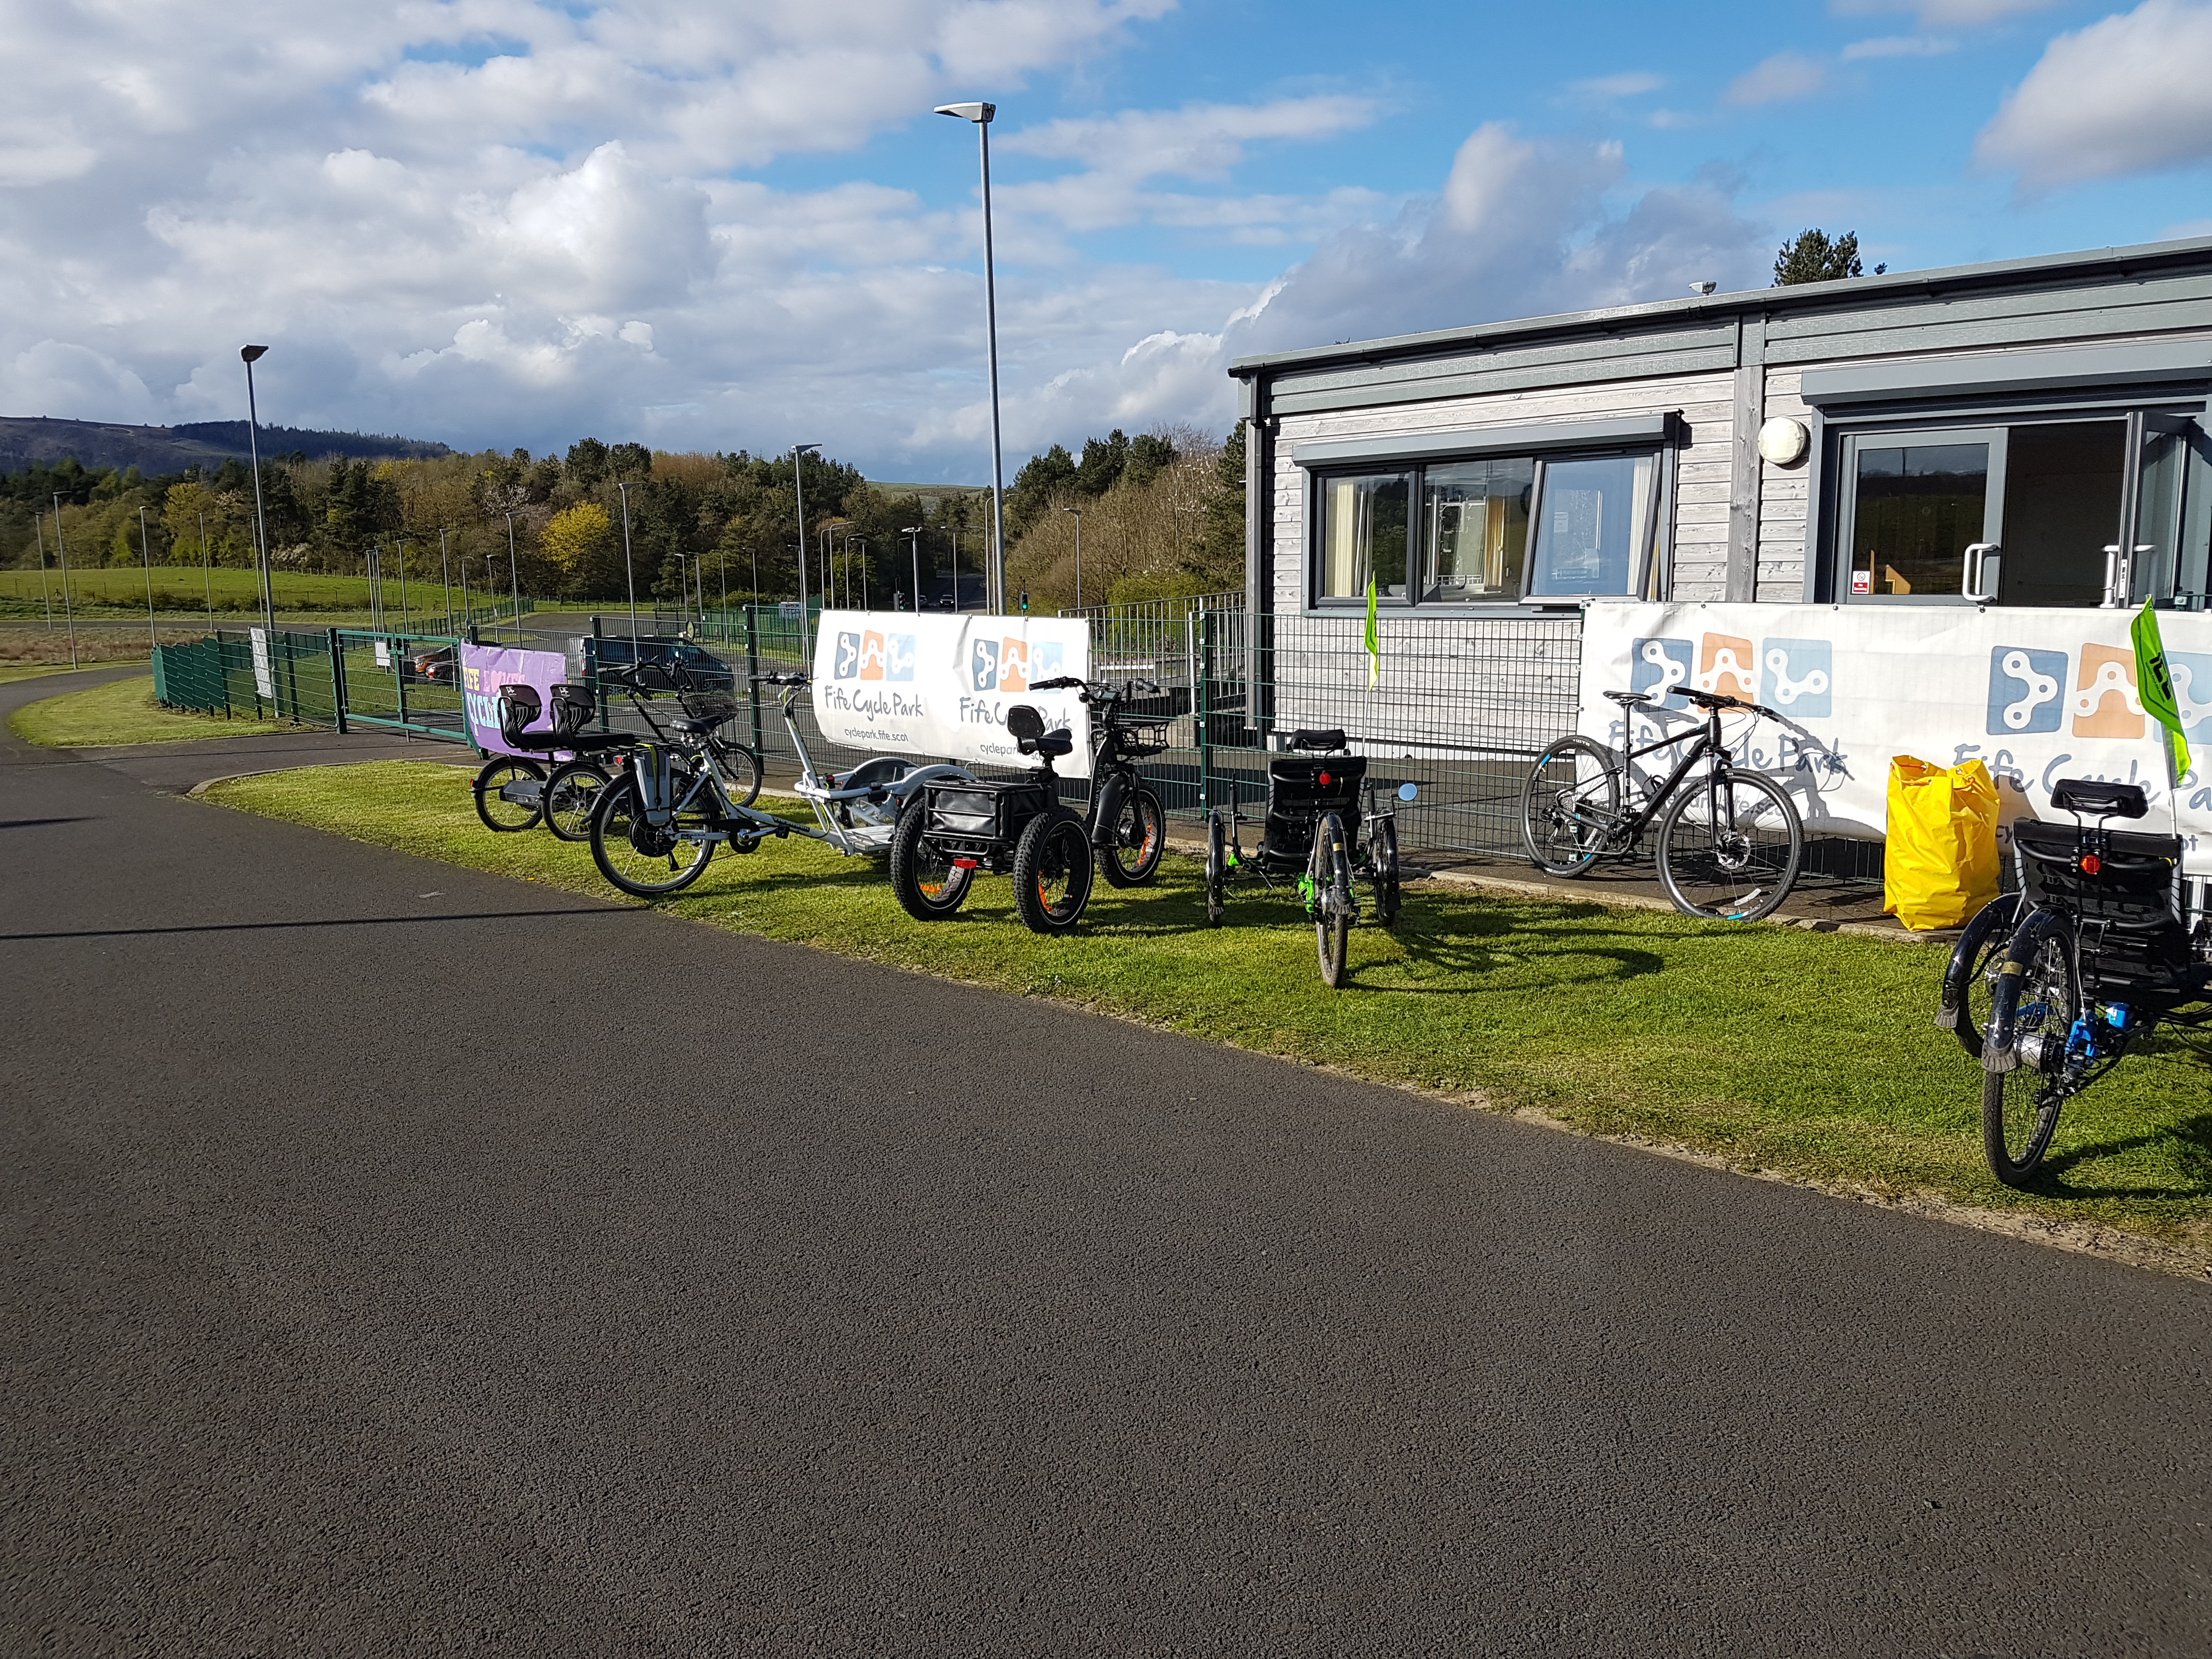 Adaptive bikes at Fife Cycle Park for the CPD event